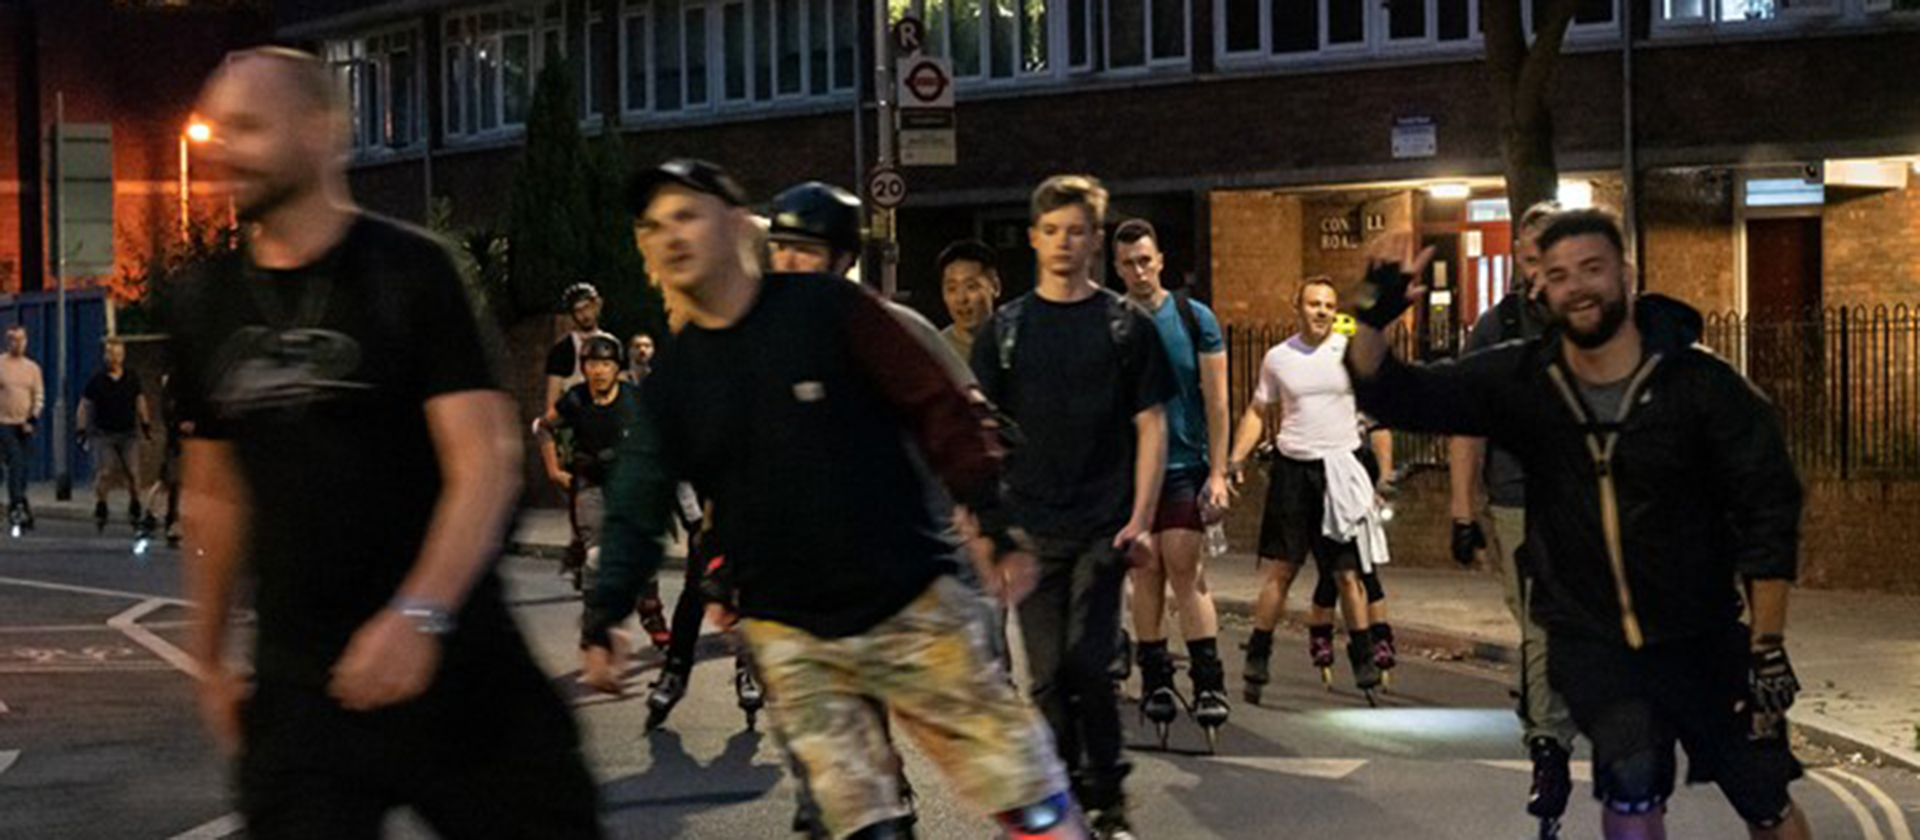 Night time photograph showing people roller blading along a street, having fun